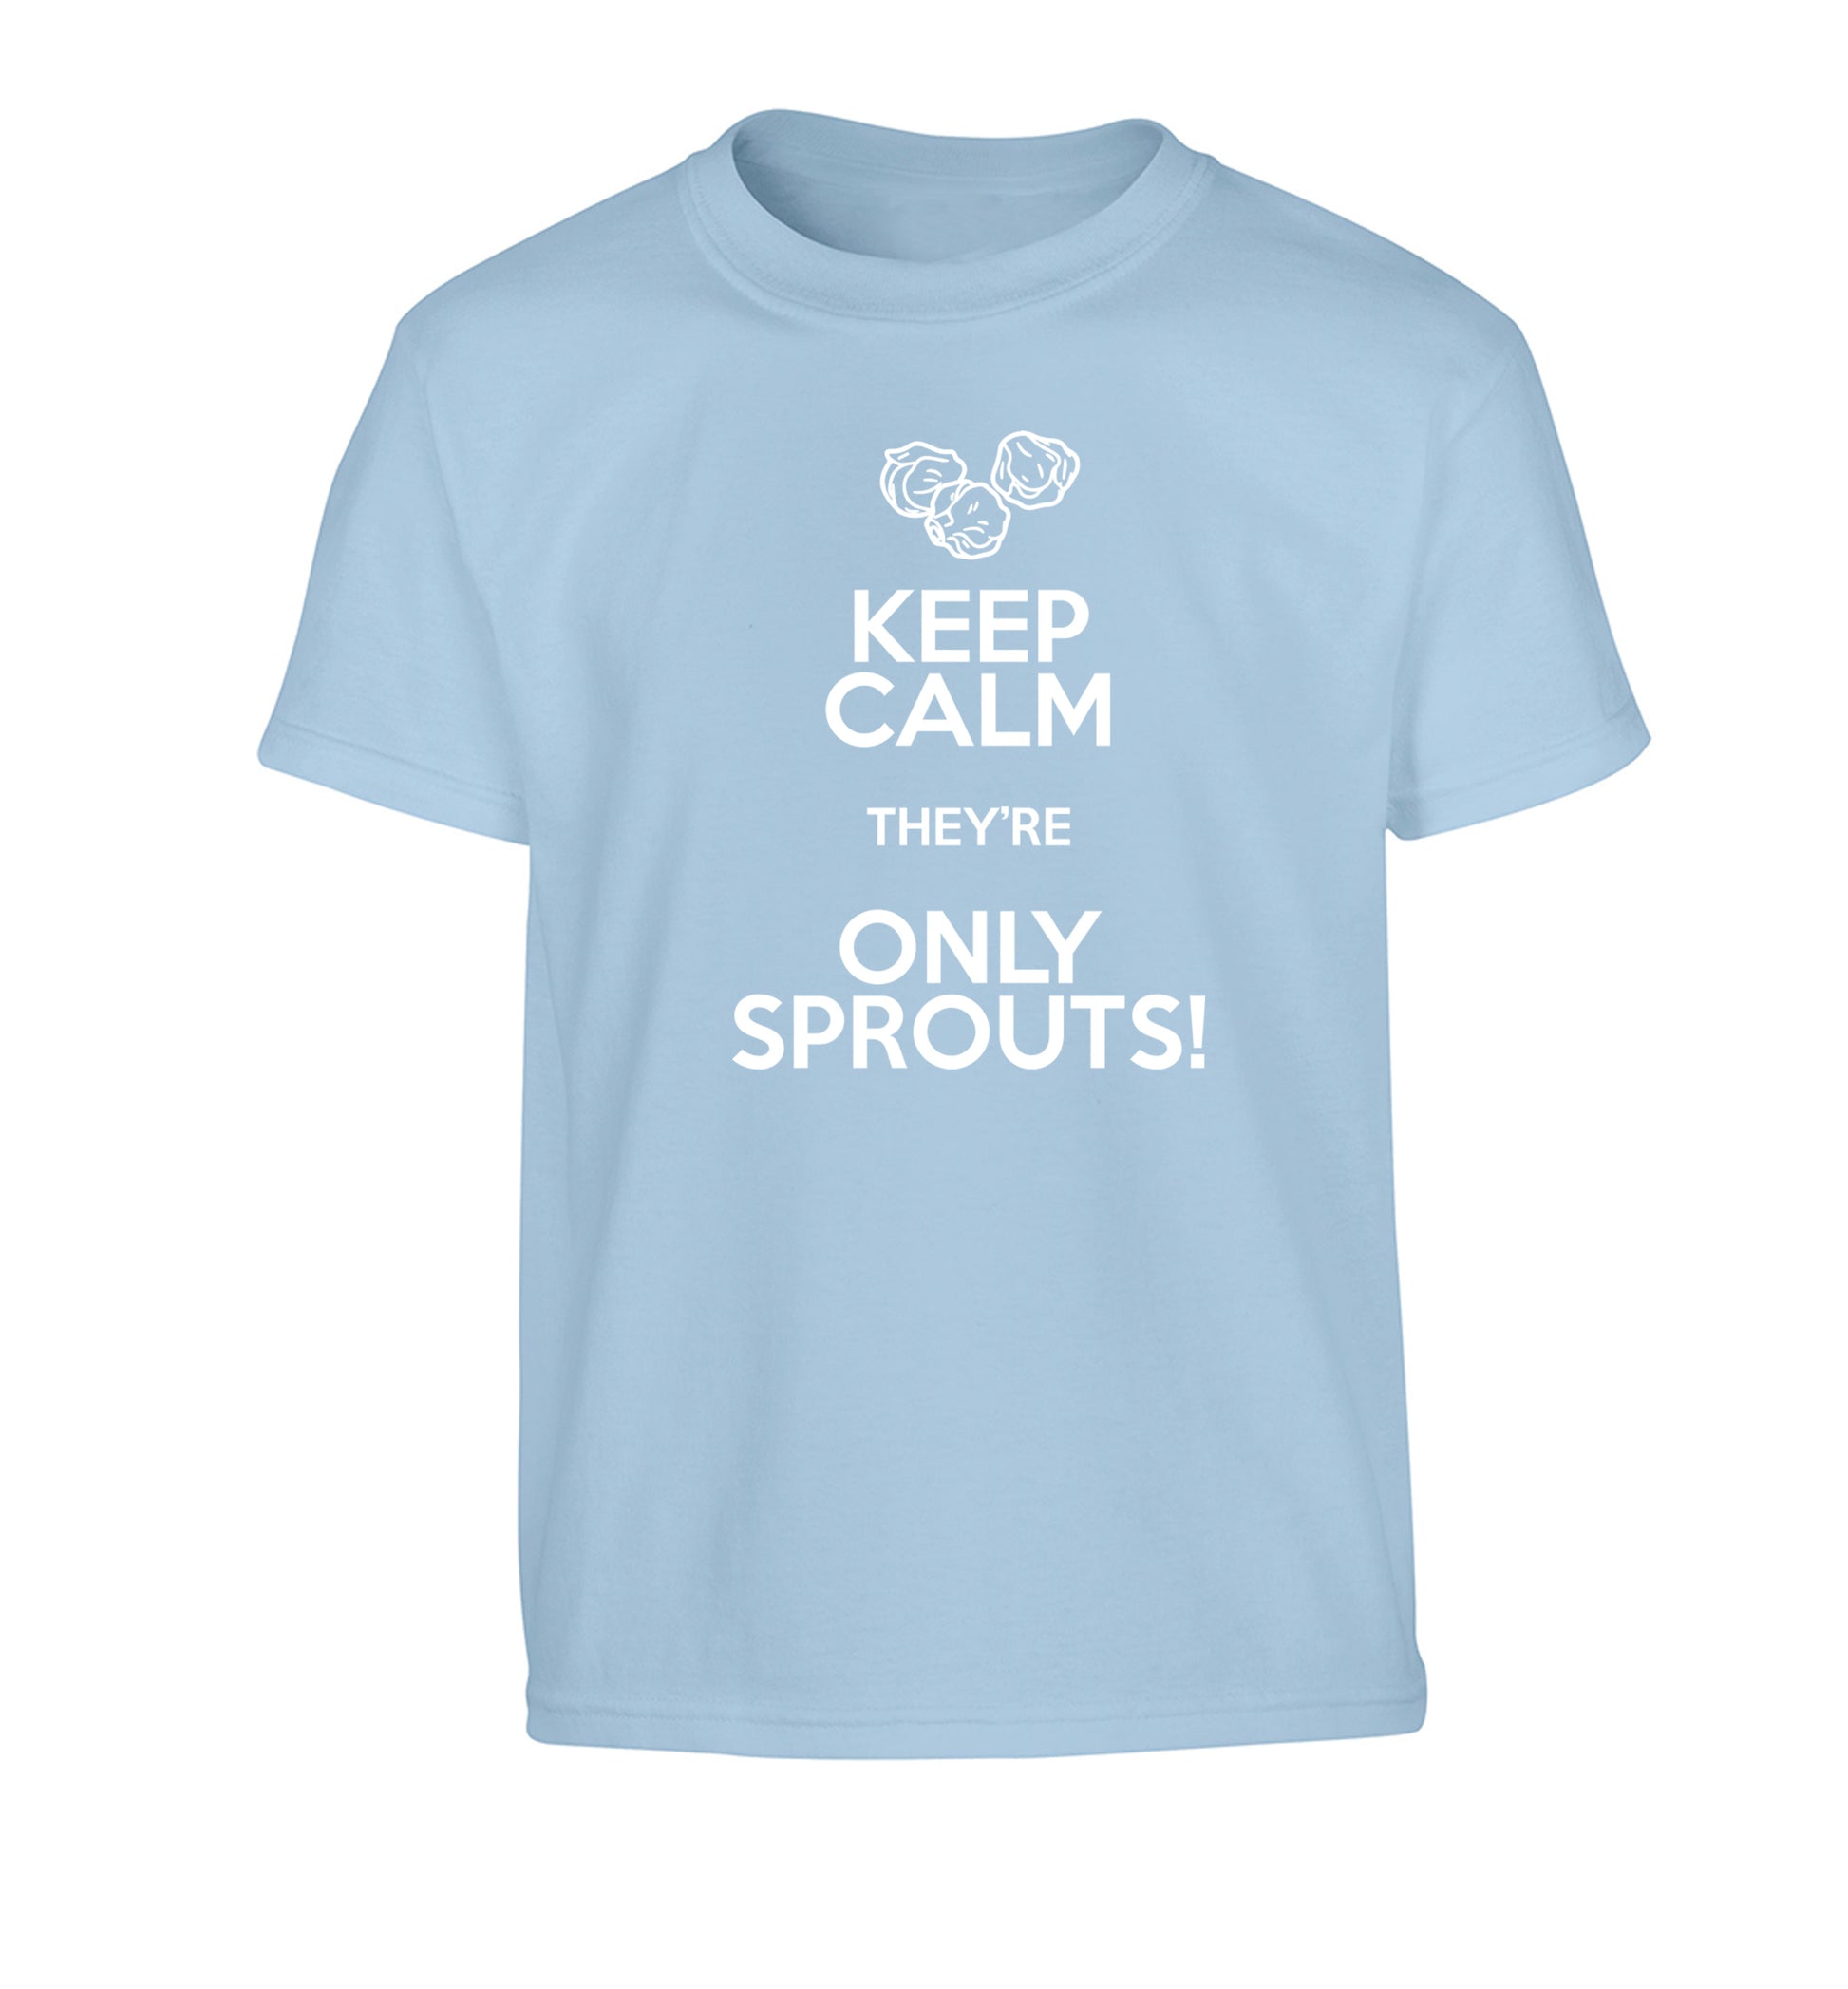 Keep calm they're only sprouts Children's light blue Tshirt 12-13 Years